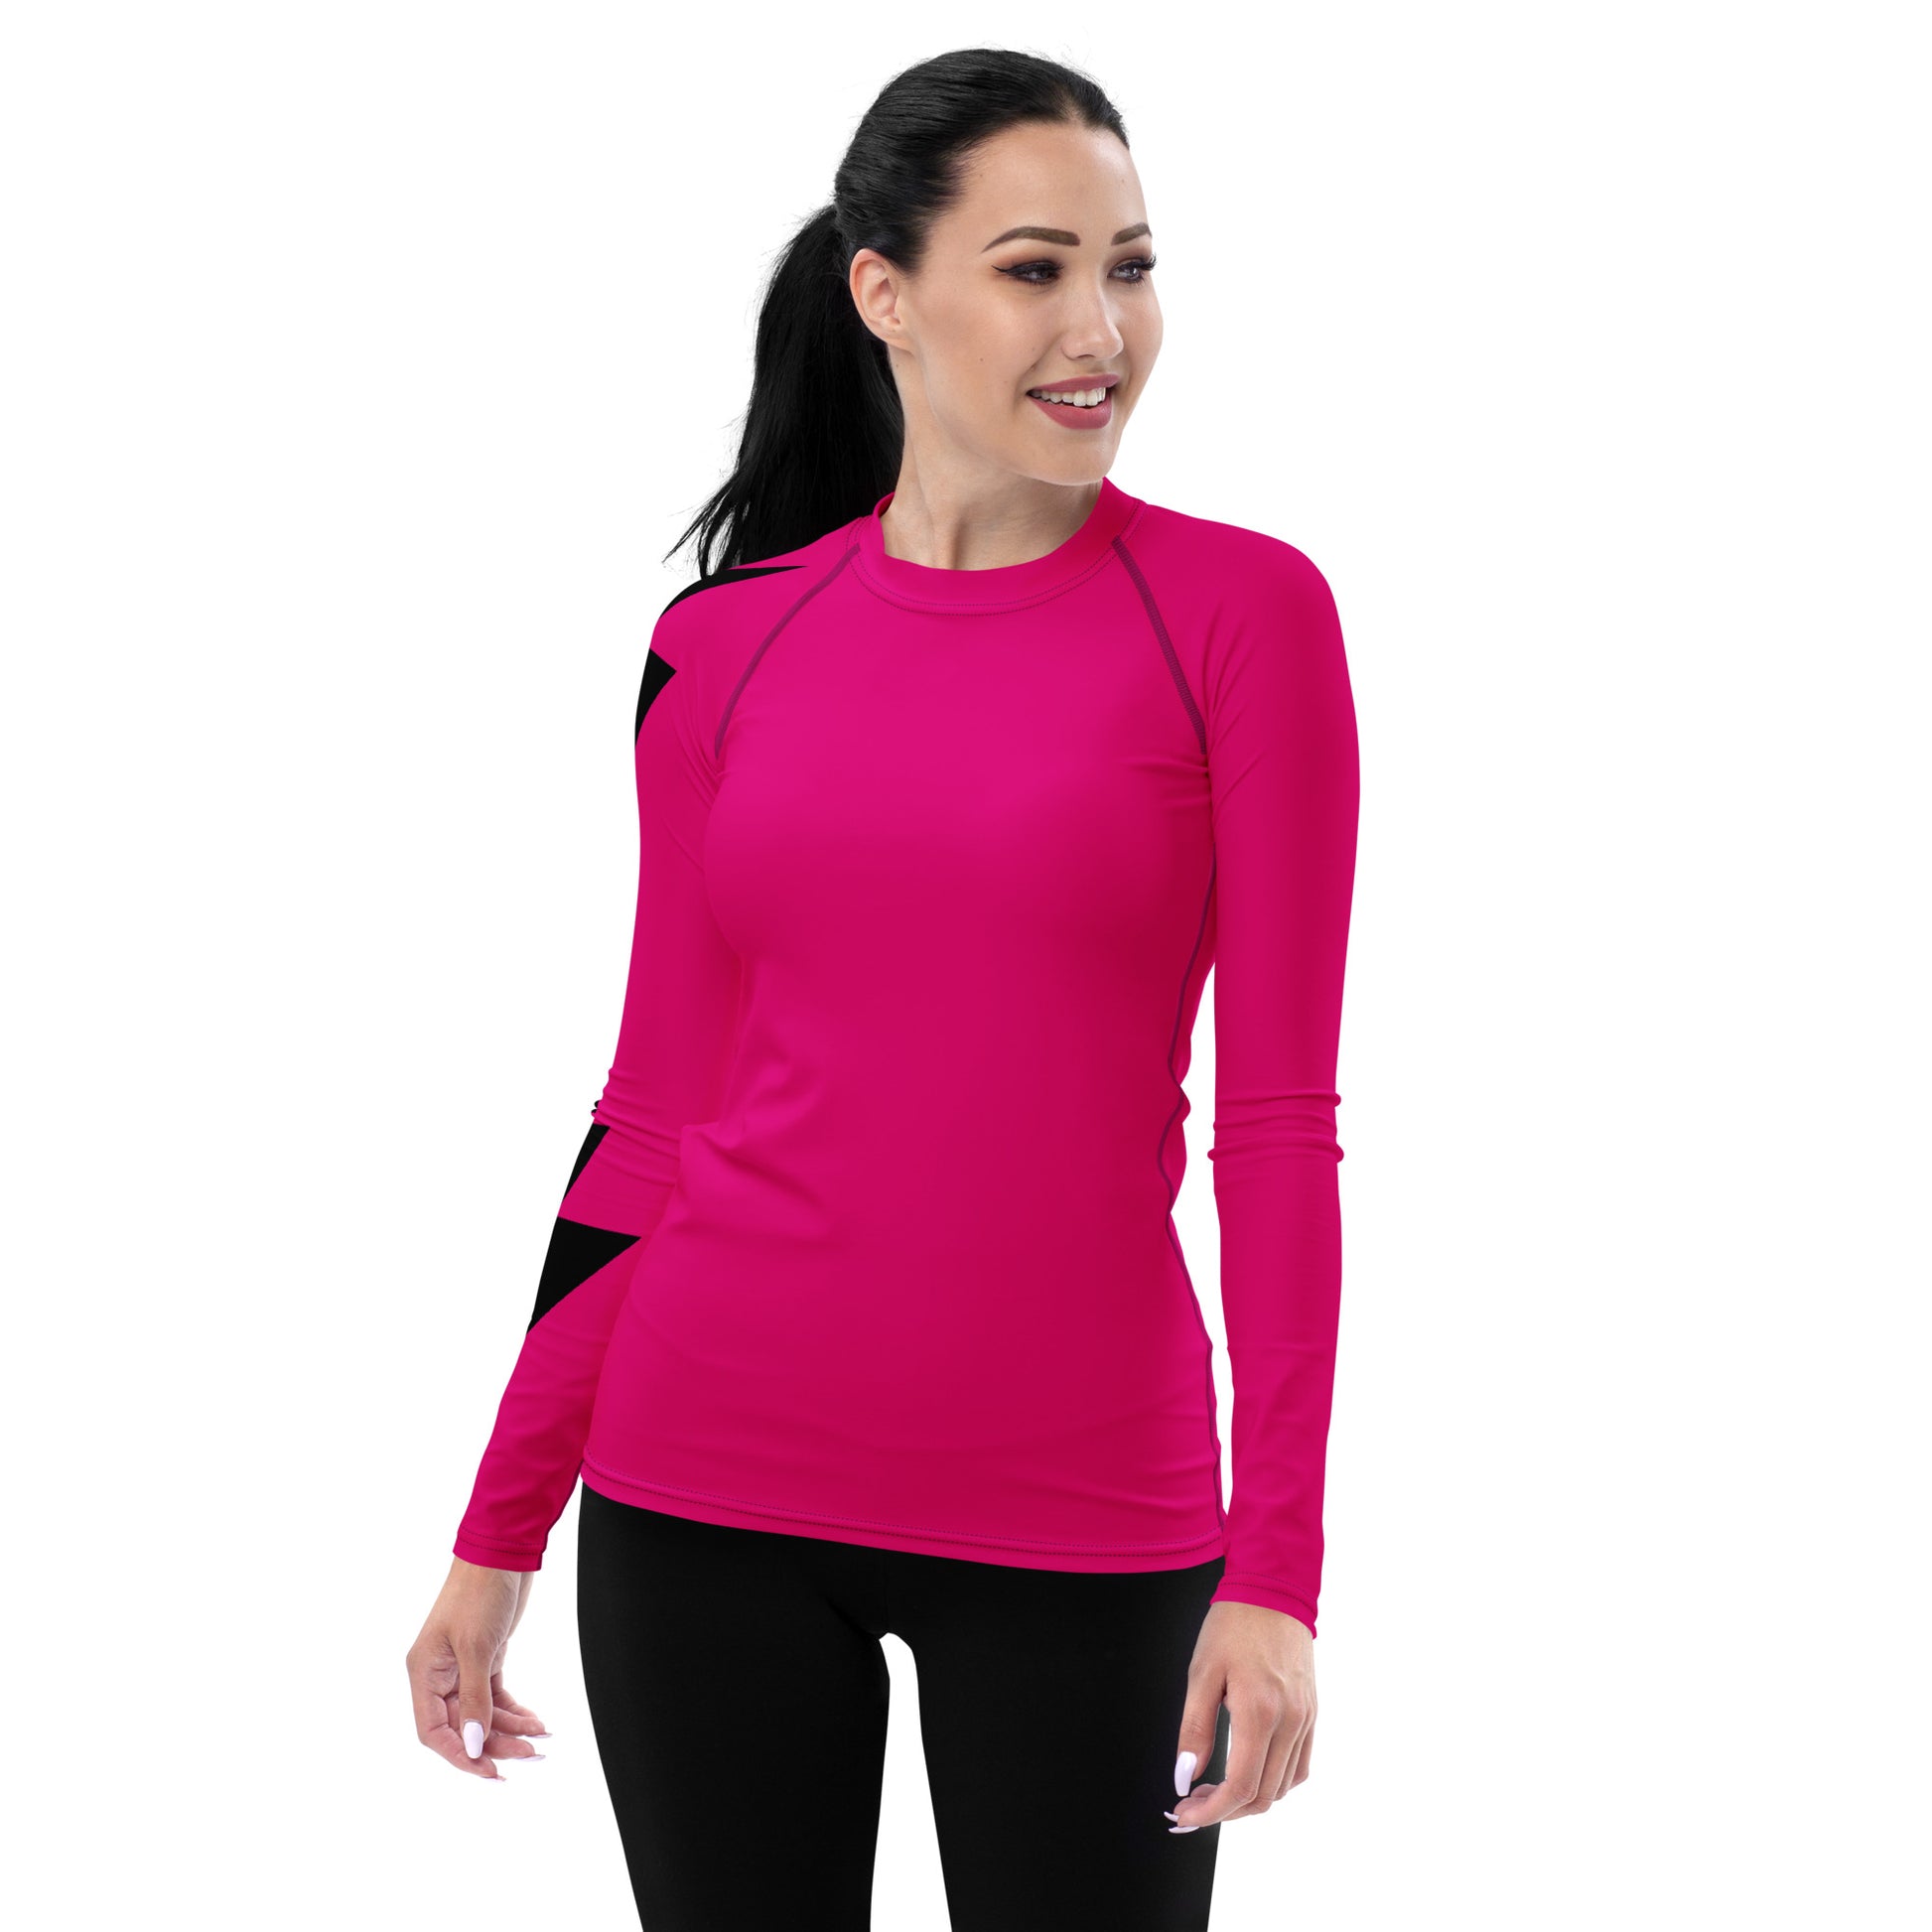 Lycra top. Active Wear-Layer or wear alone. - DMD Bags